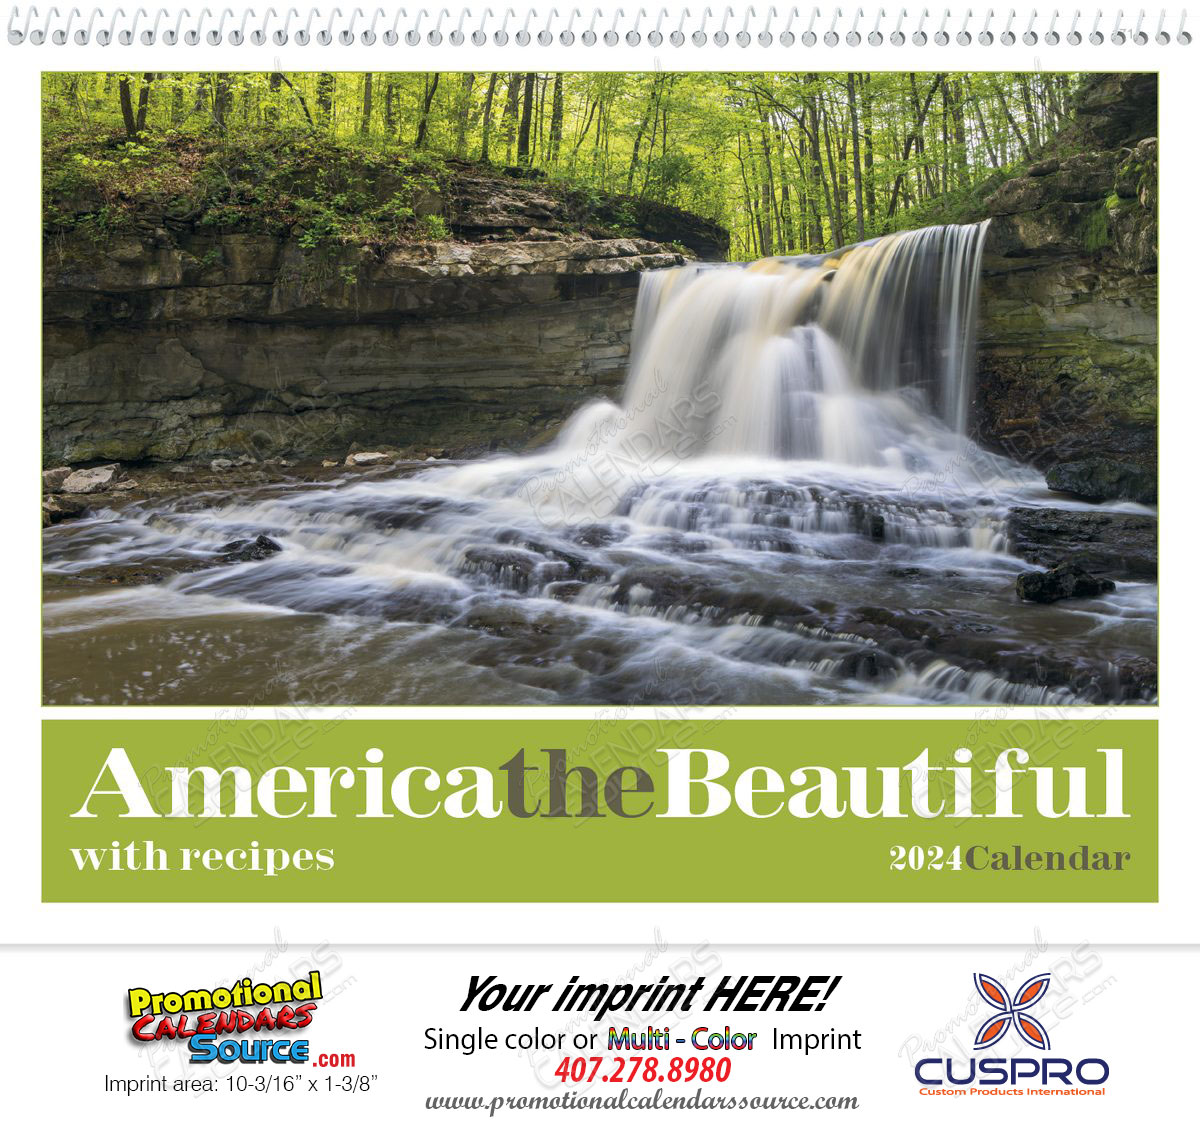 America the Beautiful with Recipes Promotional Calendar 